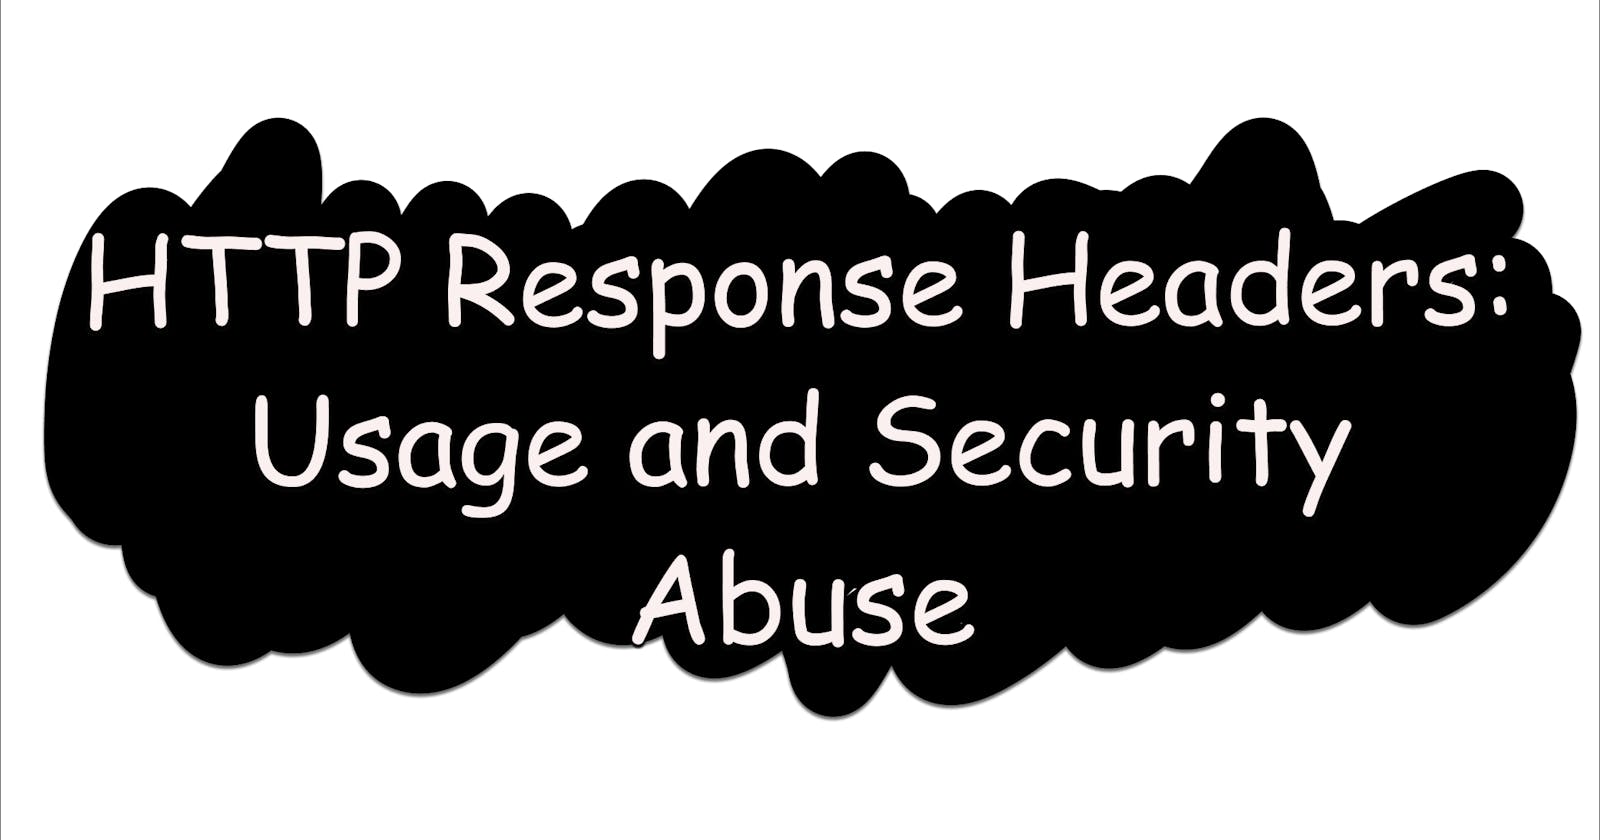 HTTP Response Headers: Usage and Security Abuse